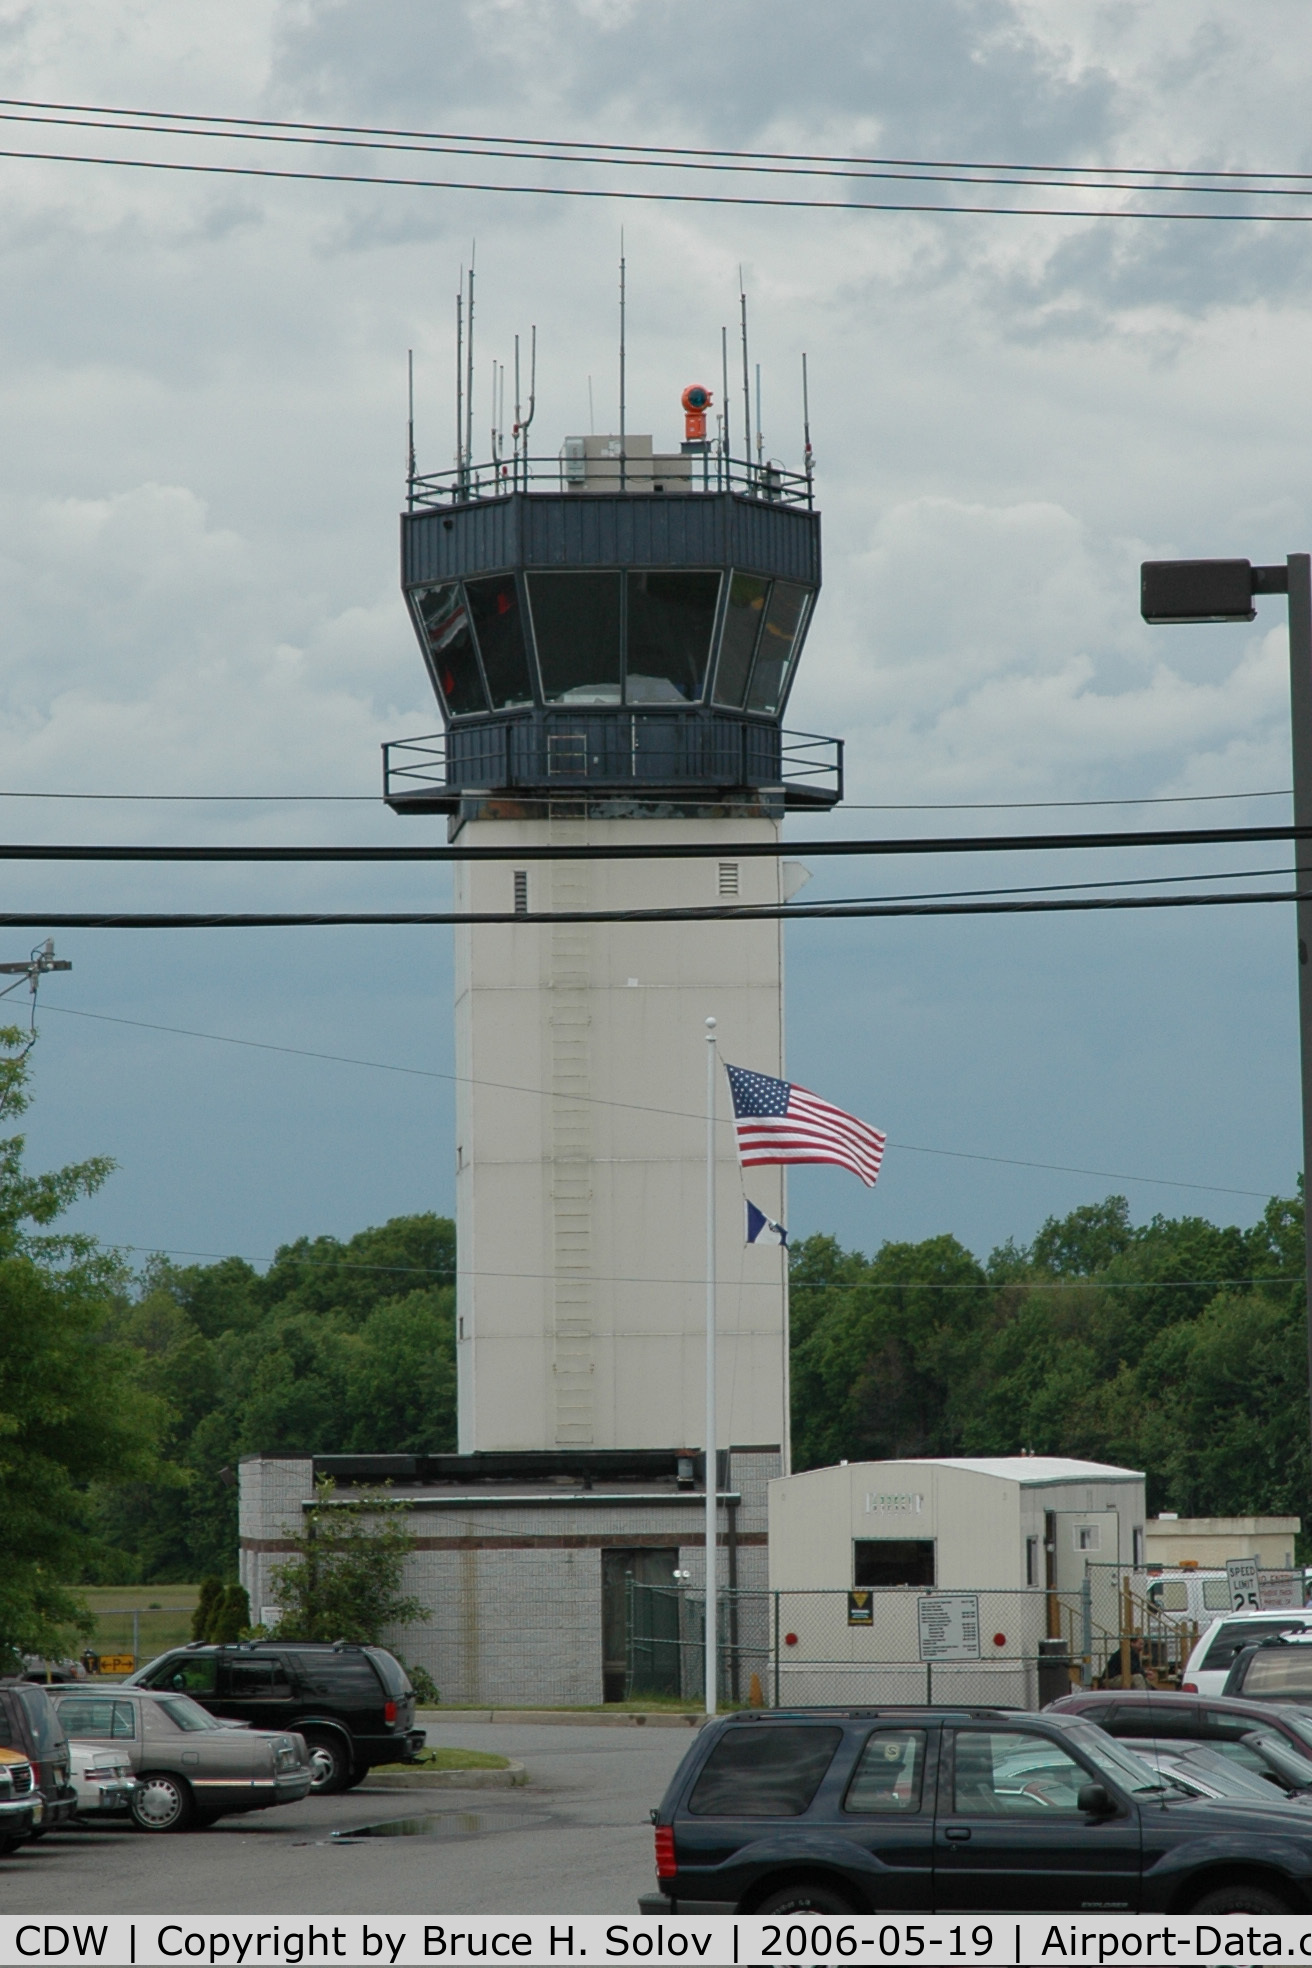 Essex County Airport (CDW) - Control Tower